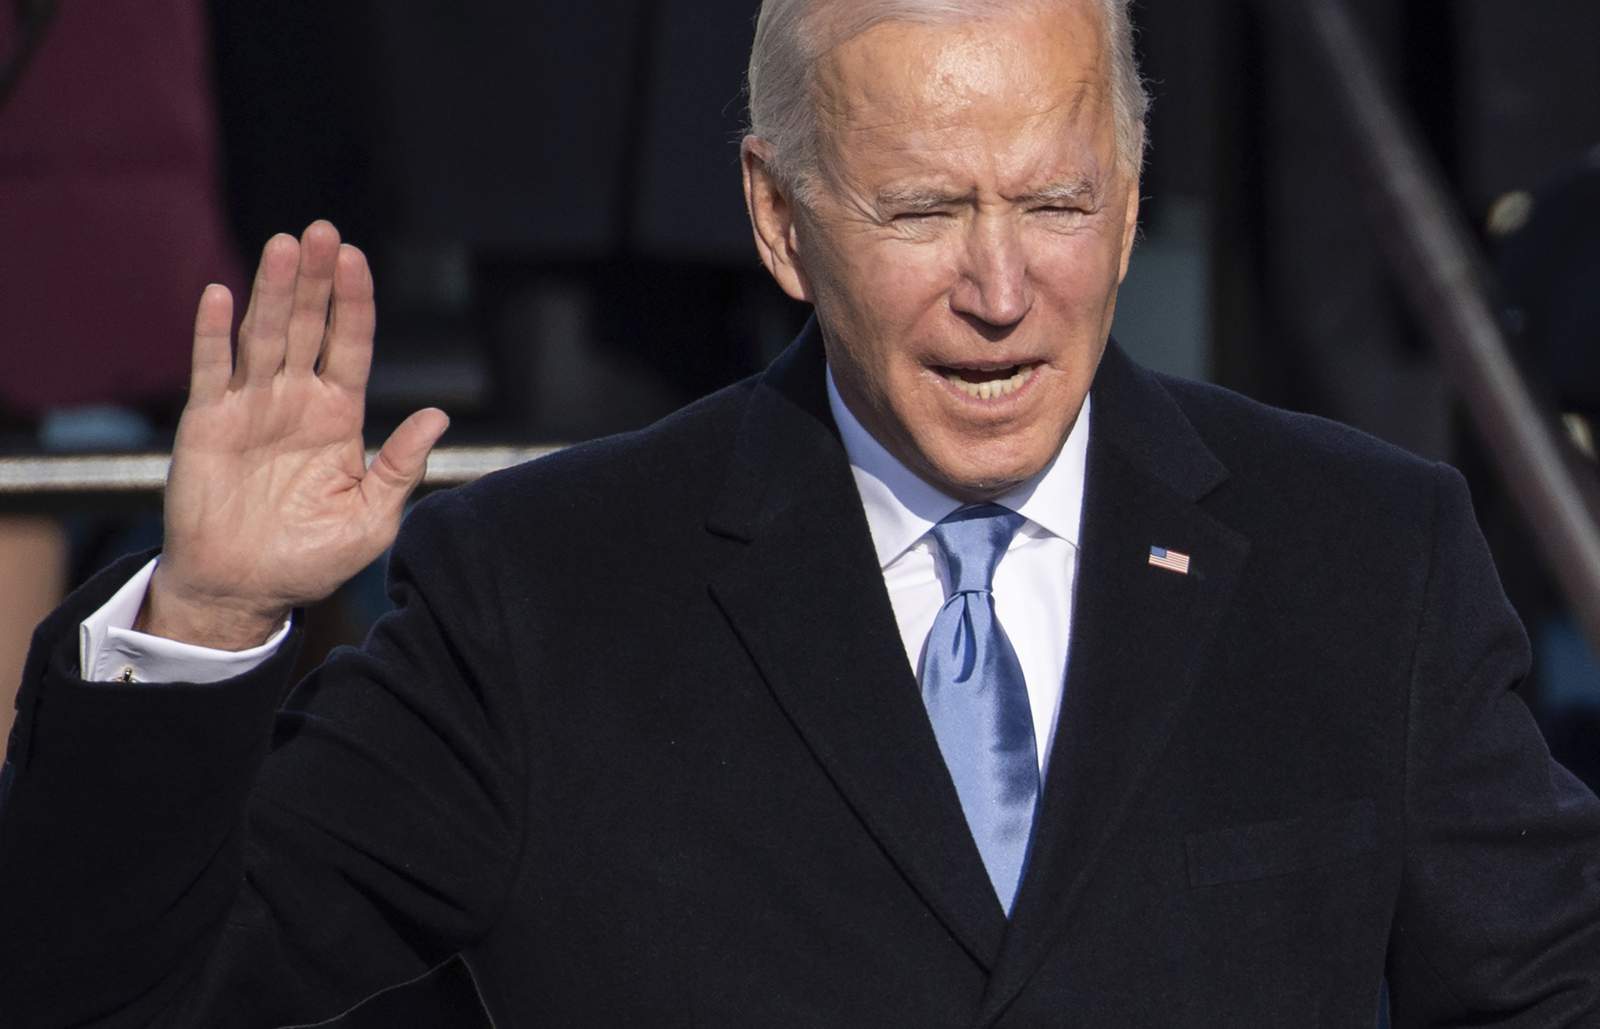 'Defeat the lies': Biden speaks of duty to defend the truth